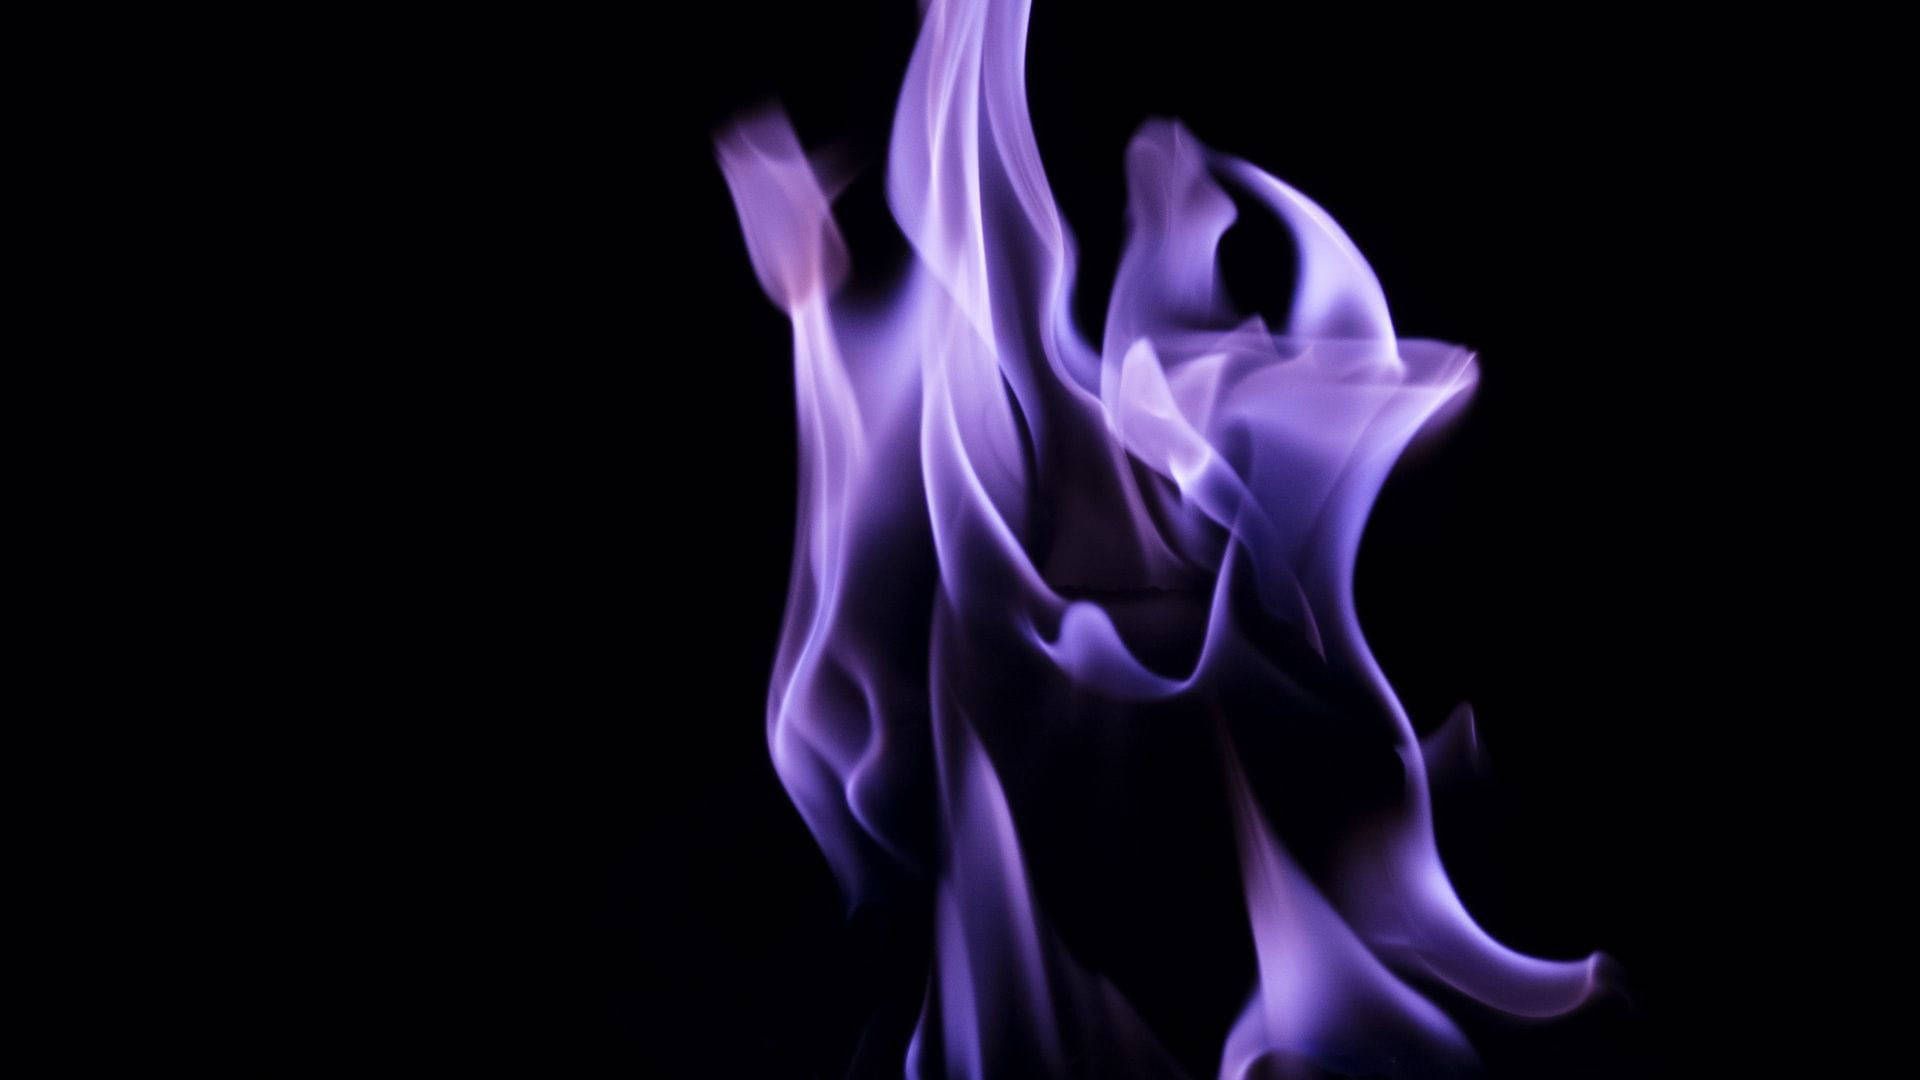 A purple flame on black background - Fire